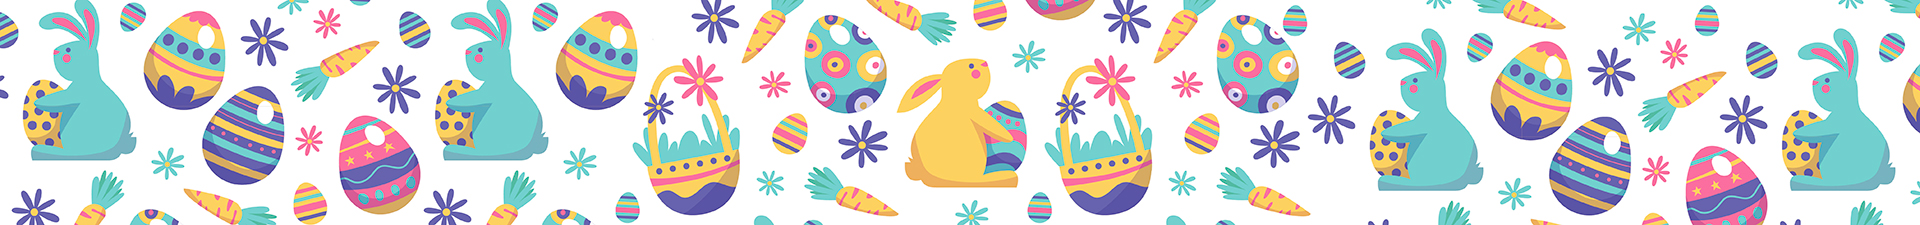 Easter: decorative eggs and decorations